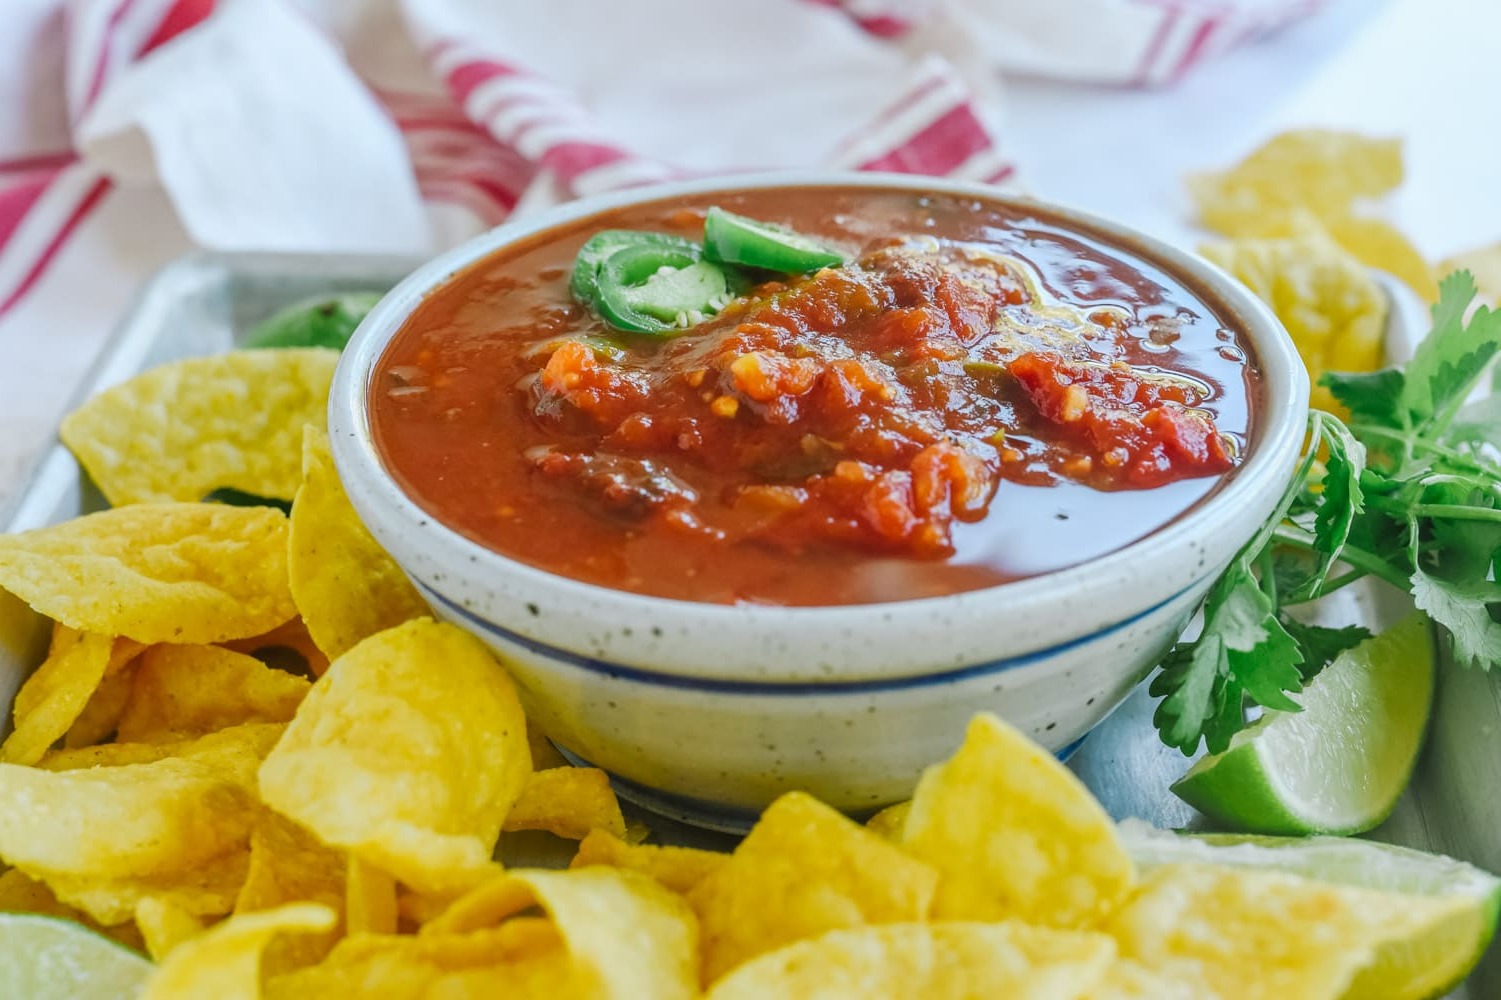 How to Make Salsa in the Instant Pot